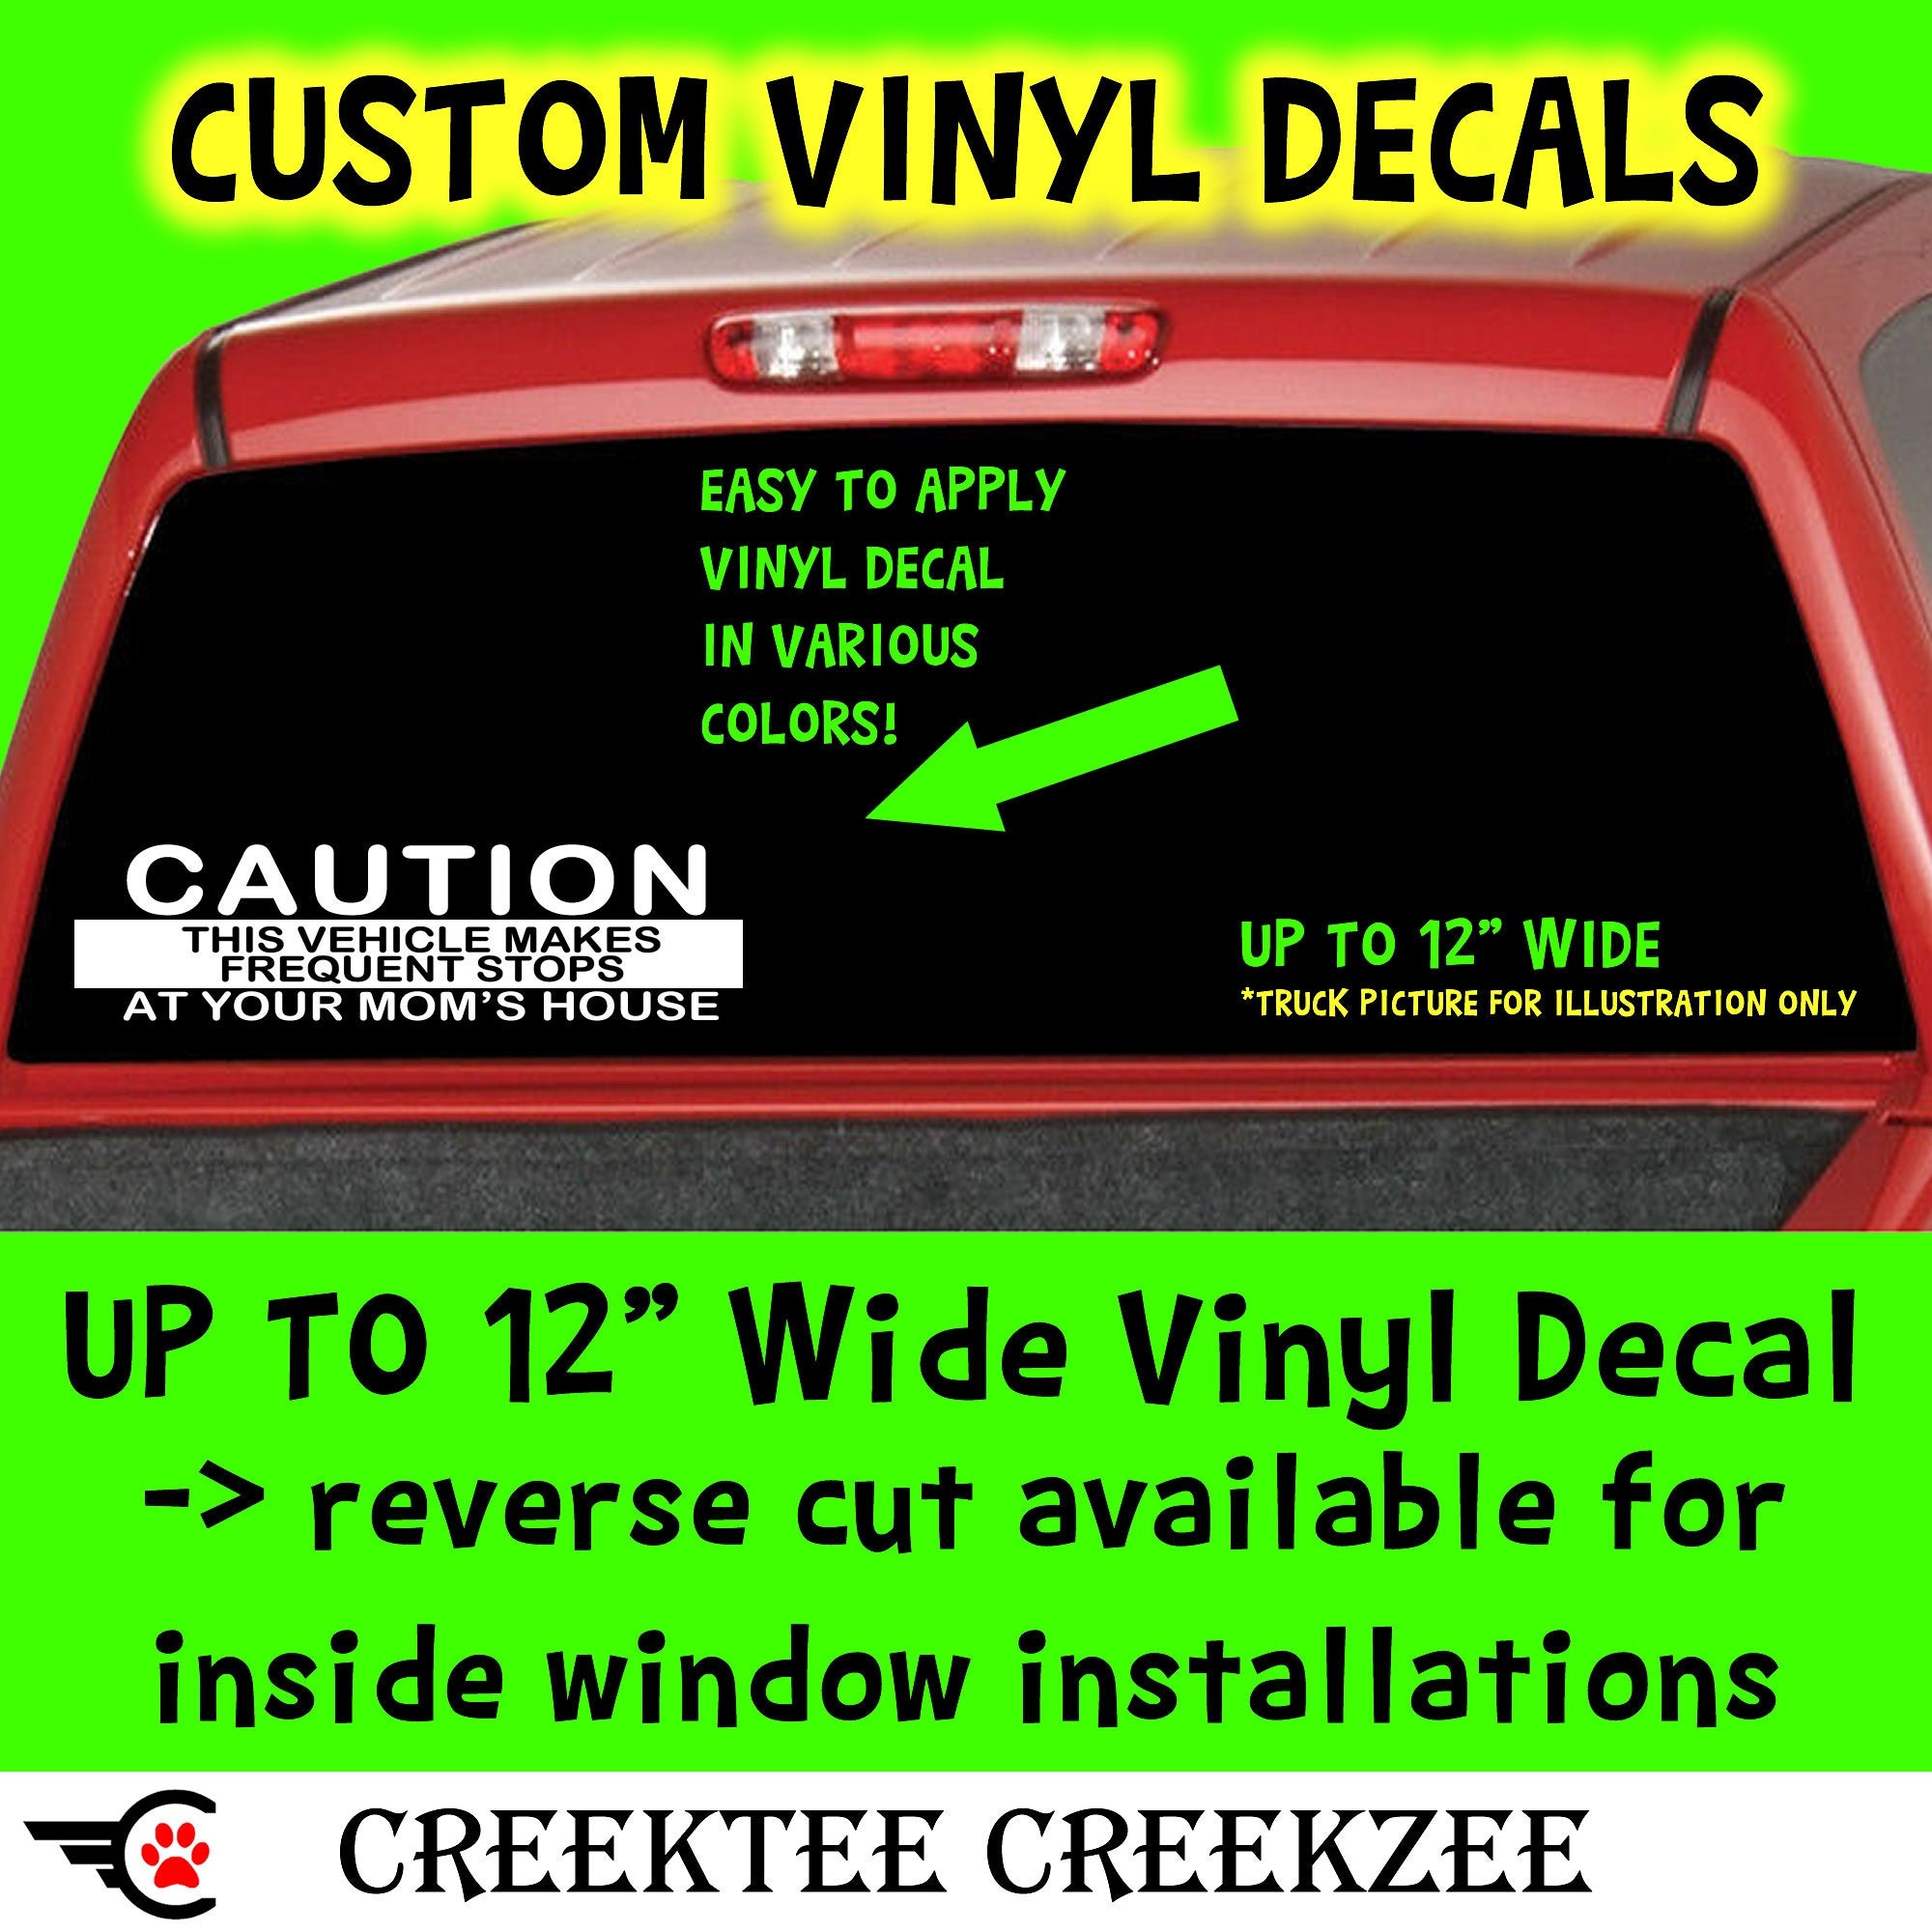 Caution this vehicle makes frequent stops at in Color Vinyl Decal Various Sizes and Colors Die Cut Vinyl Decal also in Cool Chrome Colors!